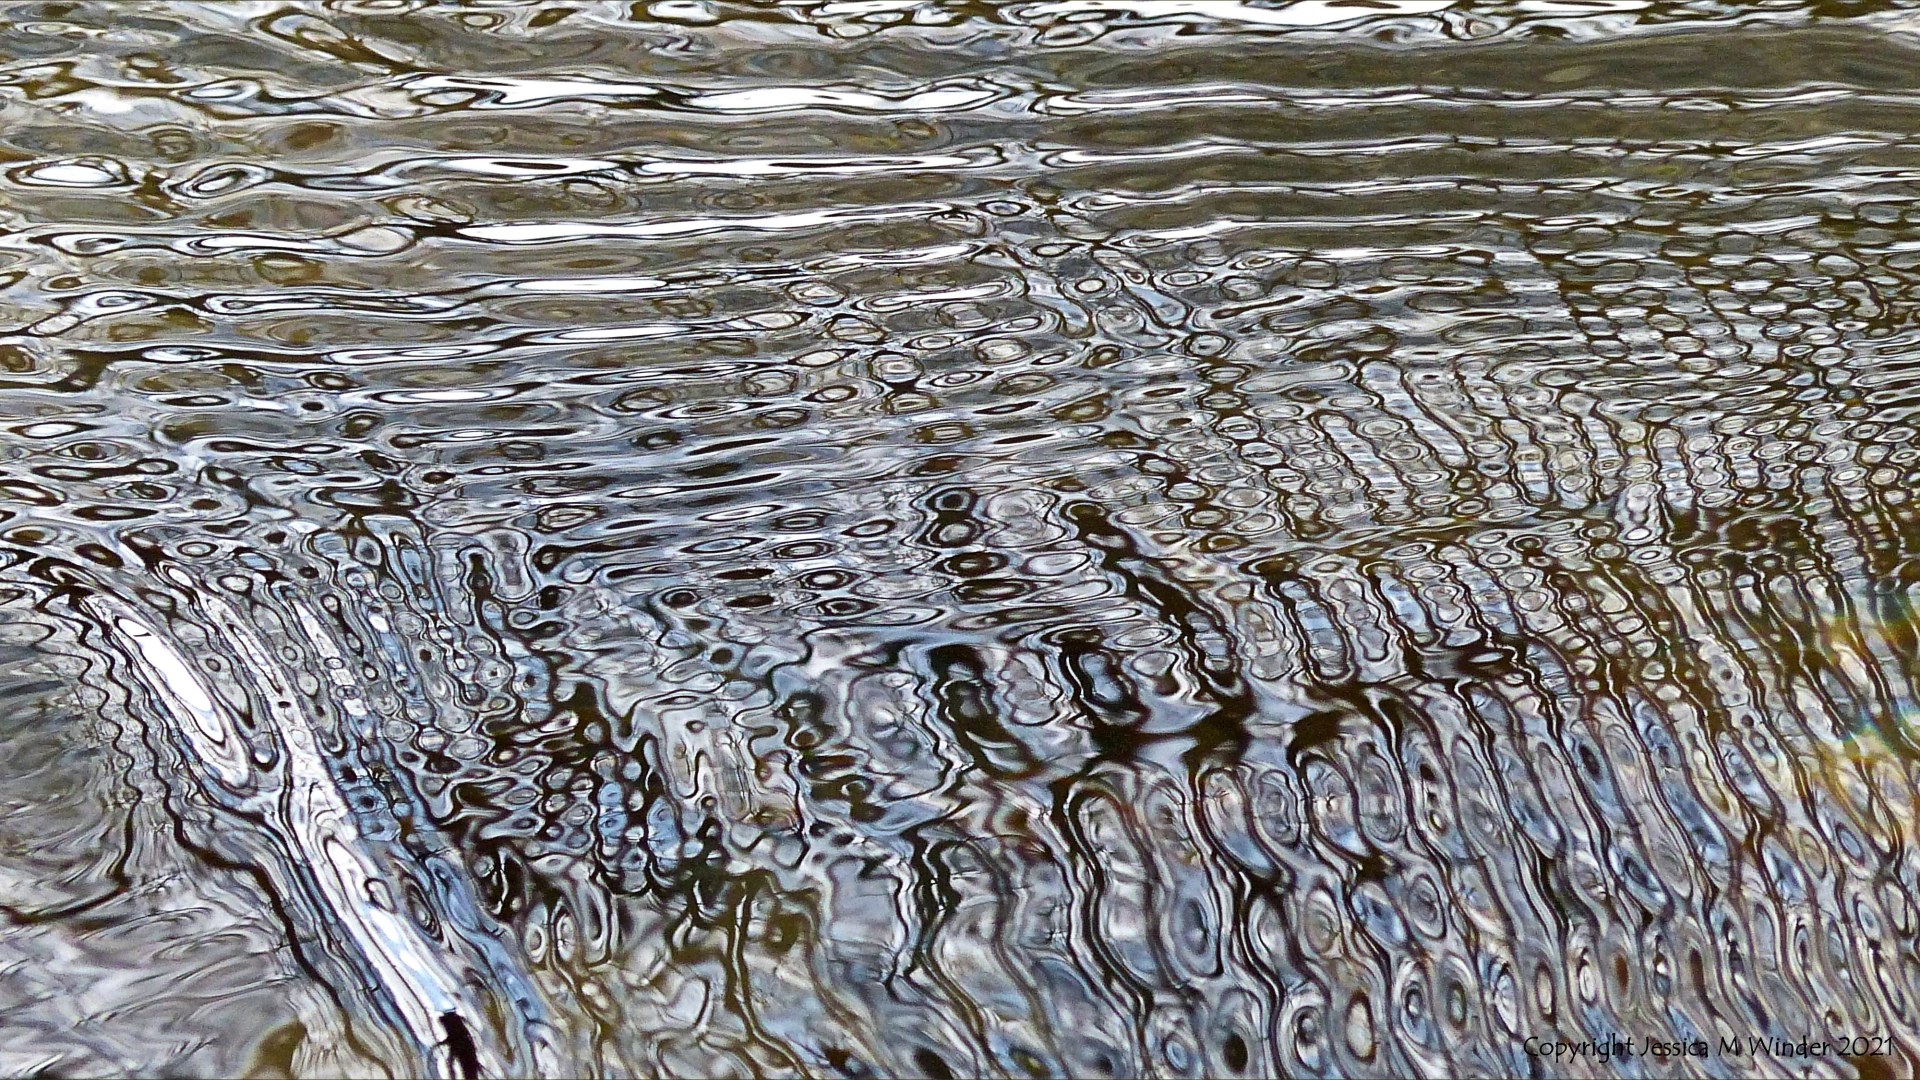 Intricate changing patterns of reflected light on fast flowing water